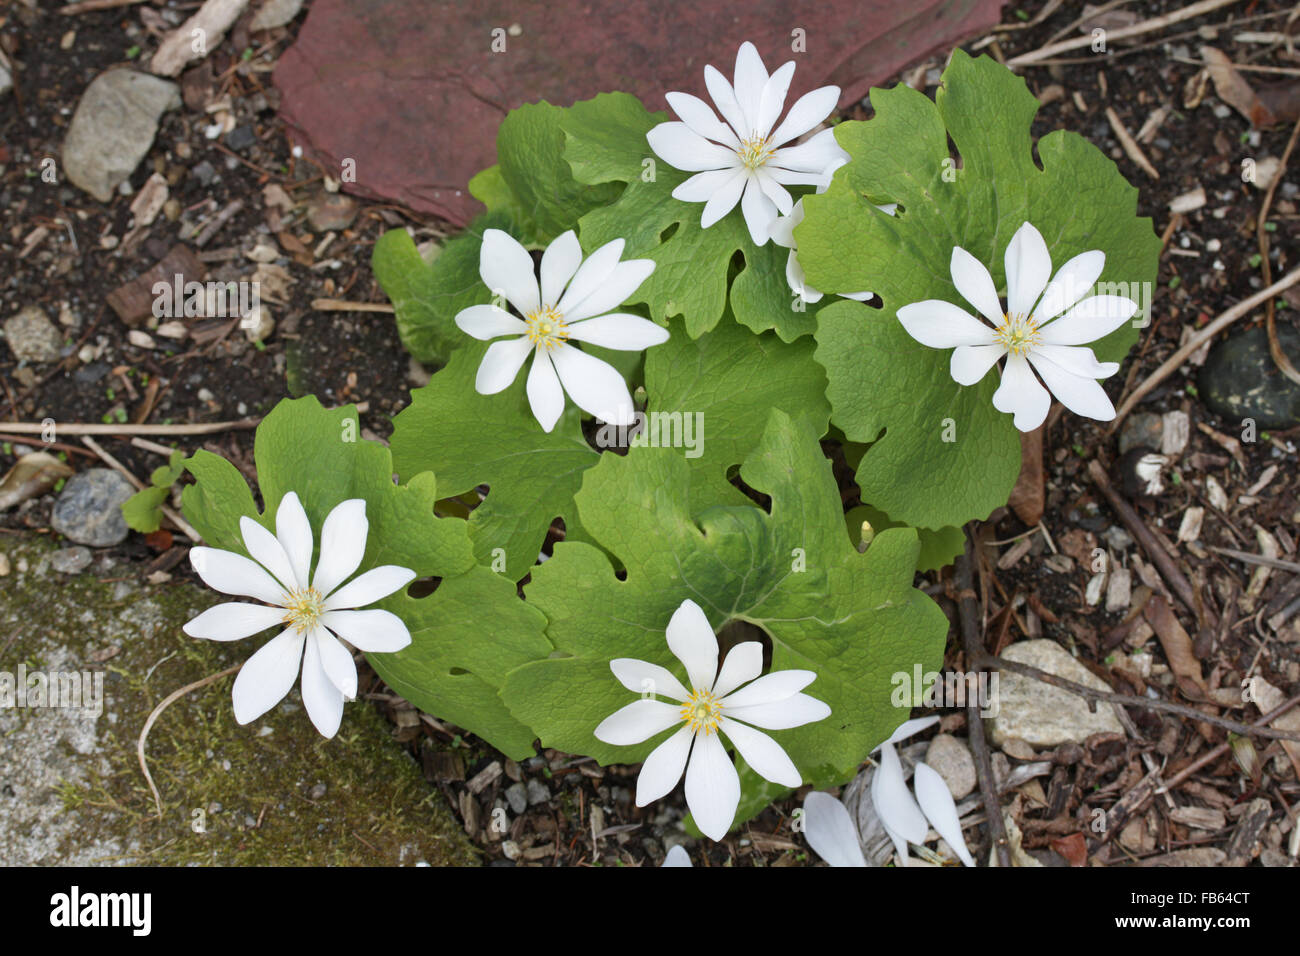 A cluster of bloodroot plants in flower. Massachusetts, USA Stock Photo